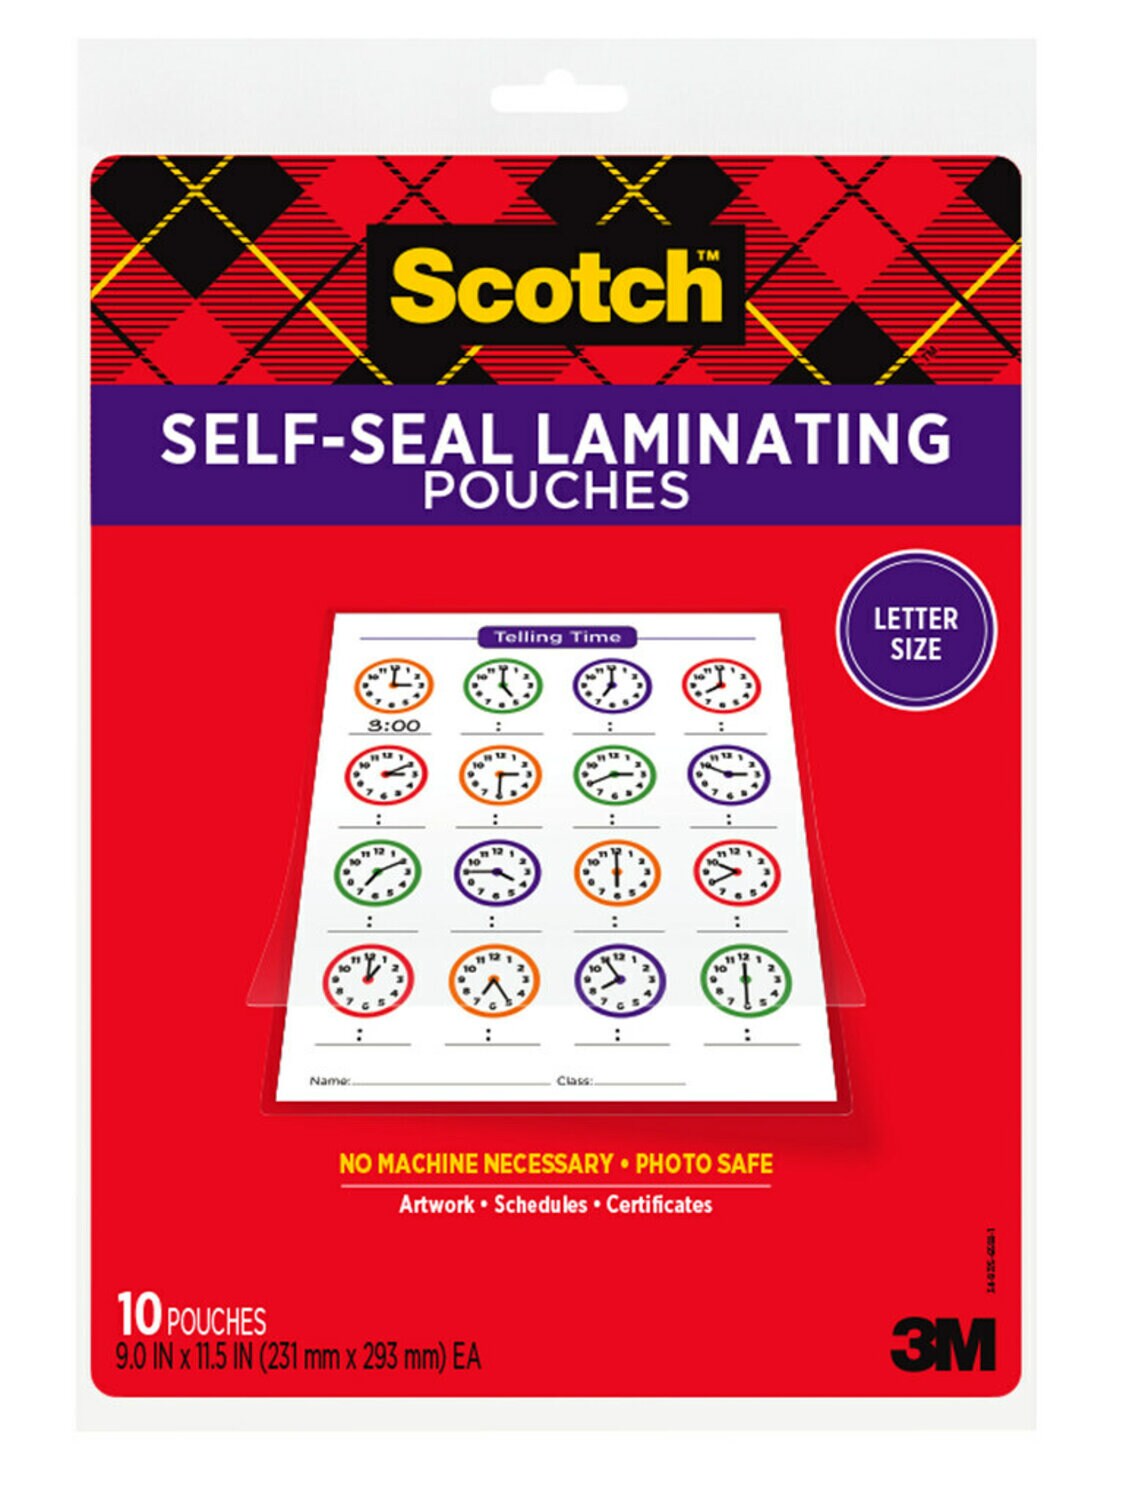 7010369982 - Scotch Self-Sealing Laminating Pouches LS854-10G, 9.0 in x 11.5 in x 0
in (231 mm x 293 mm)